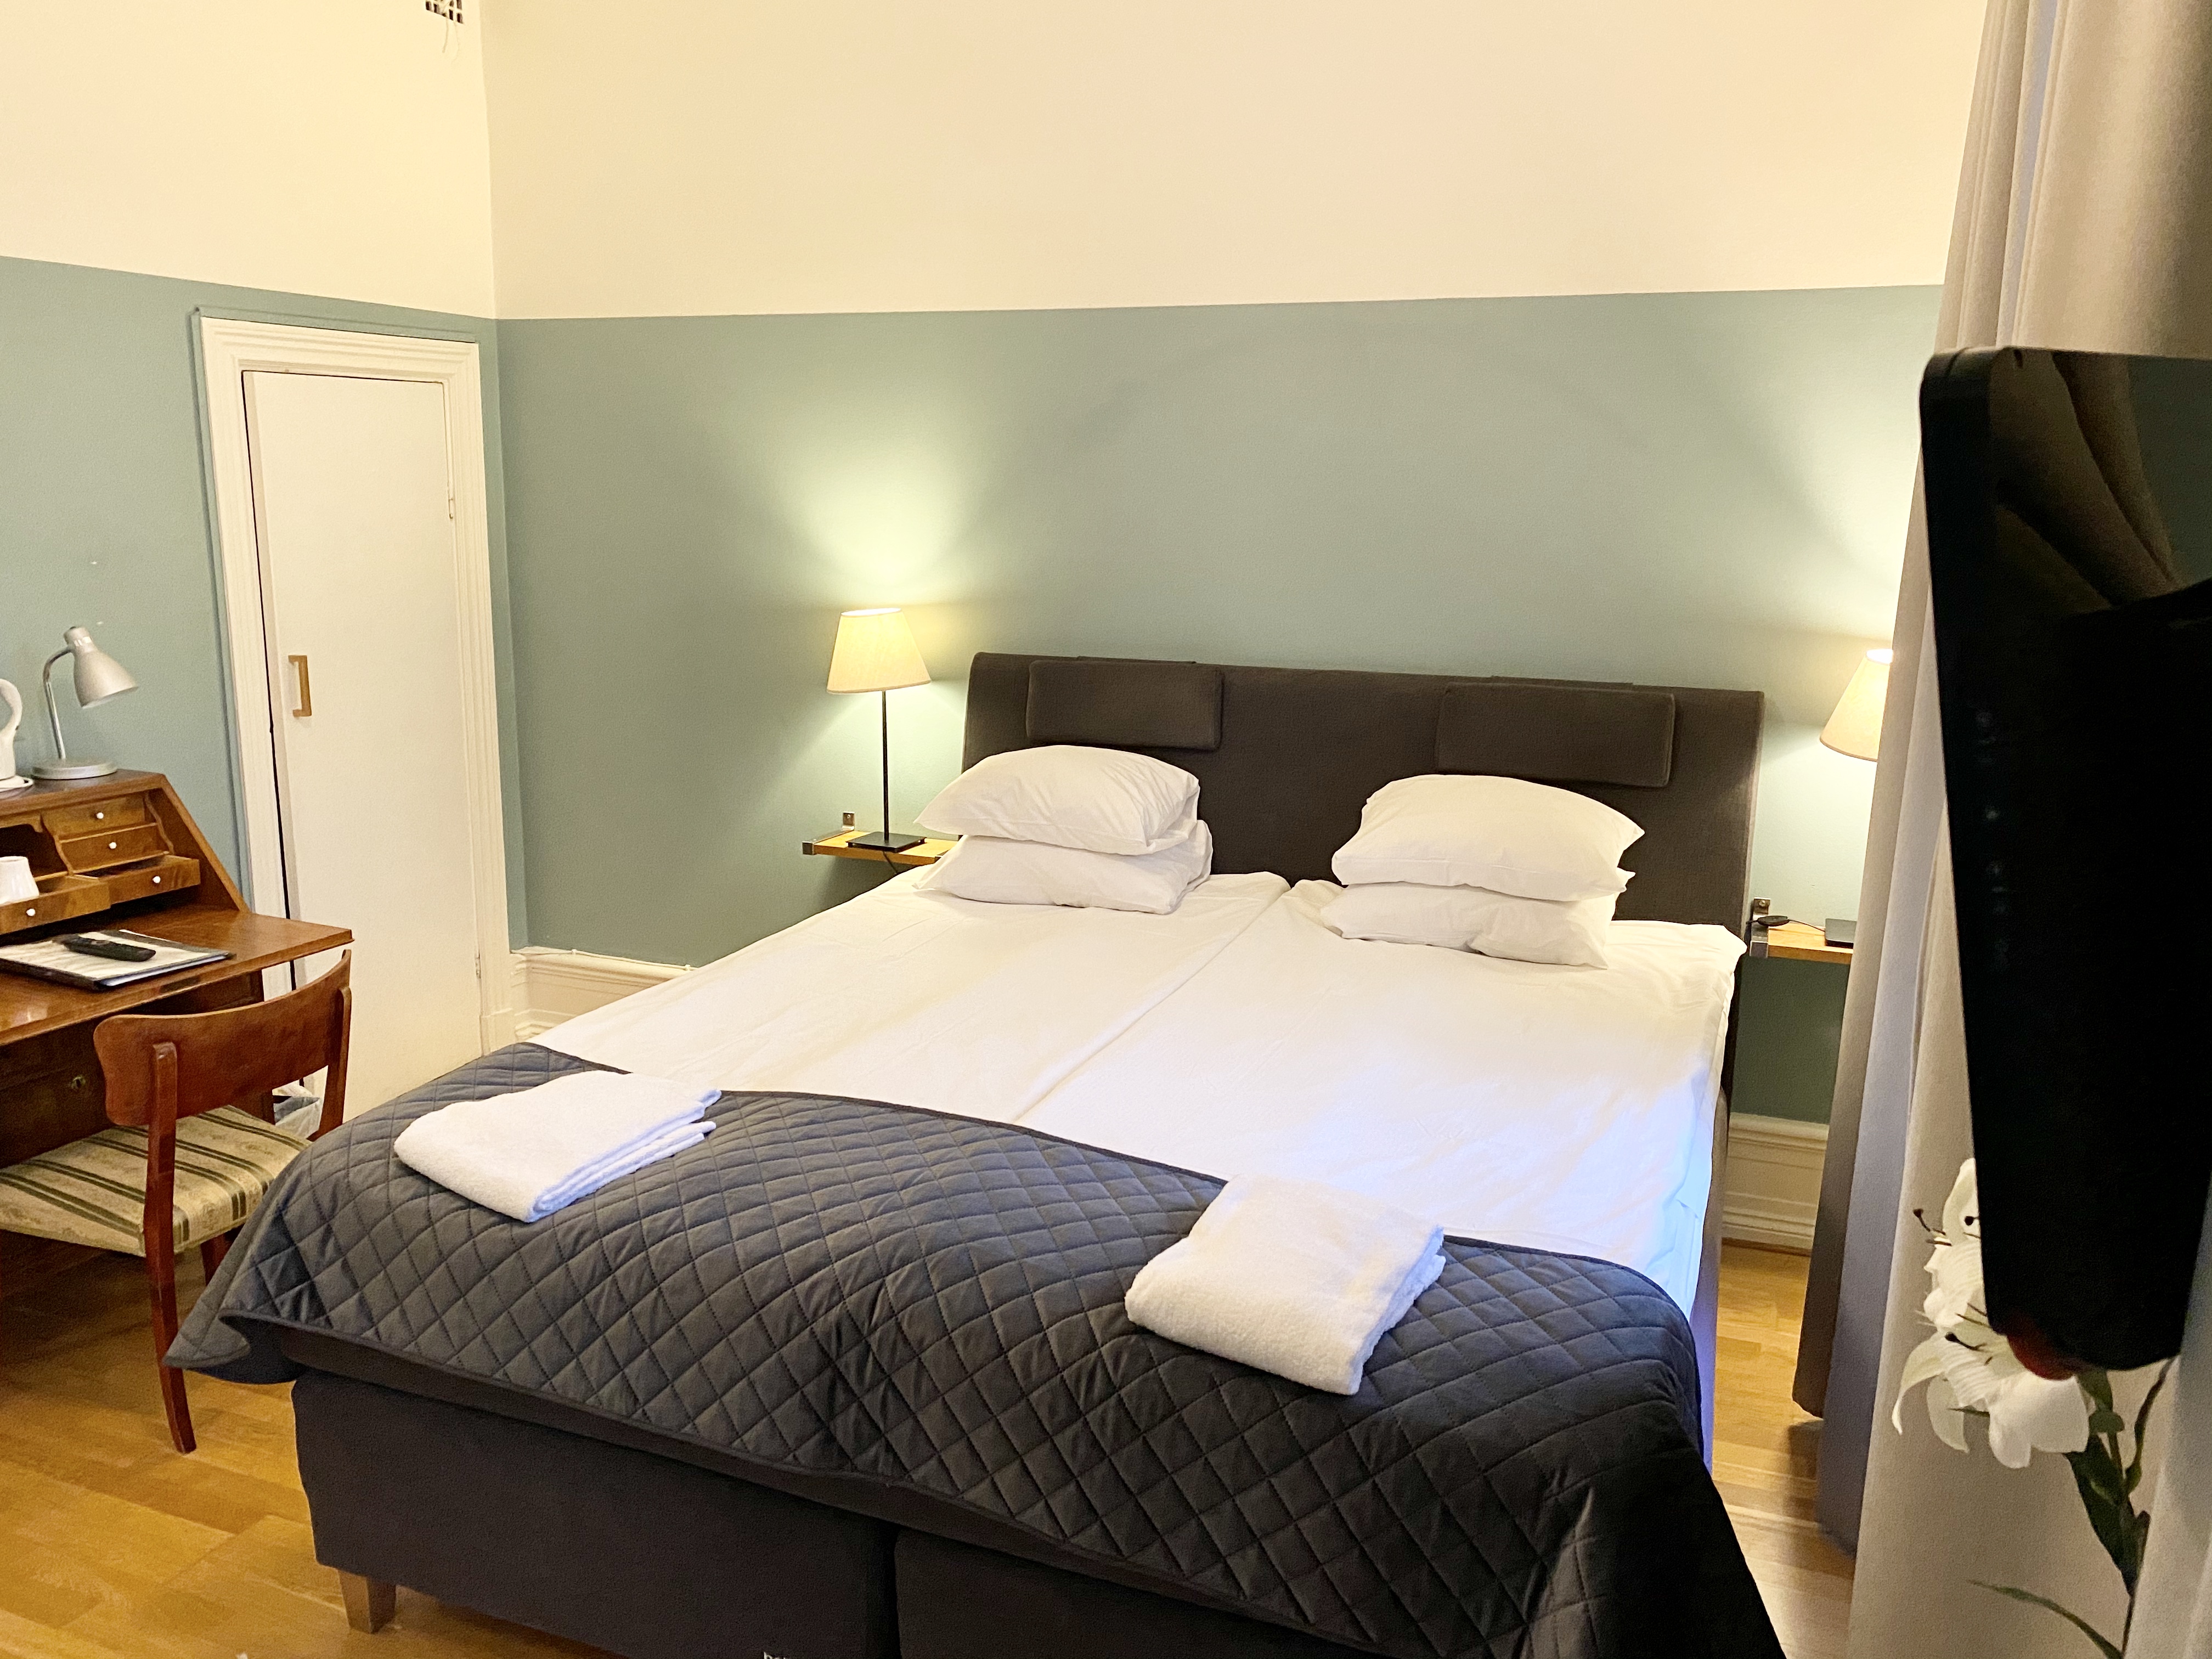 Hotell Göta <br/>70.58 ew <br/> <a href='http://vakantieoplossing.nl/outpage/?id=a0eb391944bf7b1d83ad58adf9e2185b' target='_blank'>View Details</a>